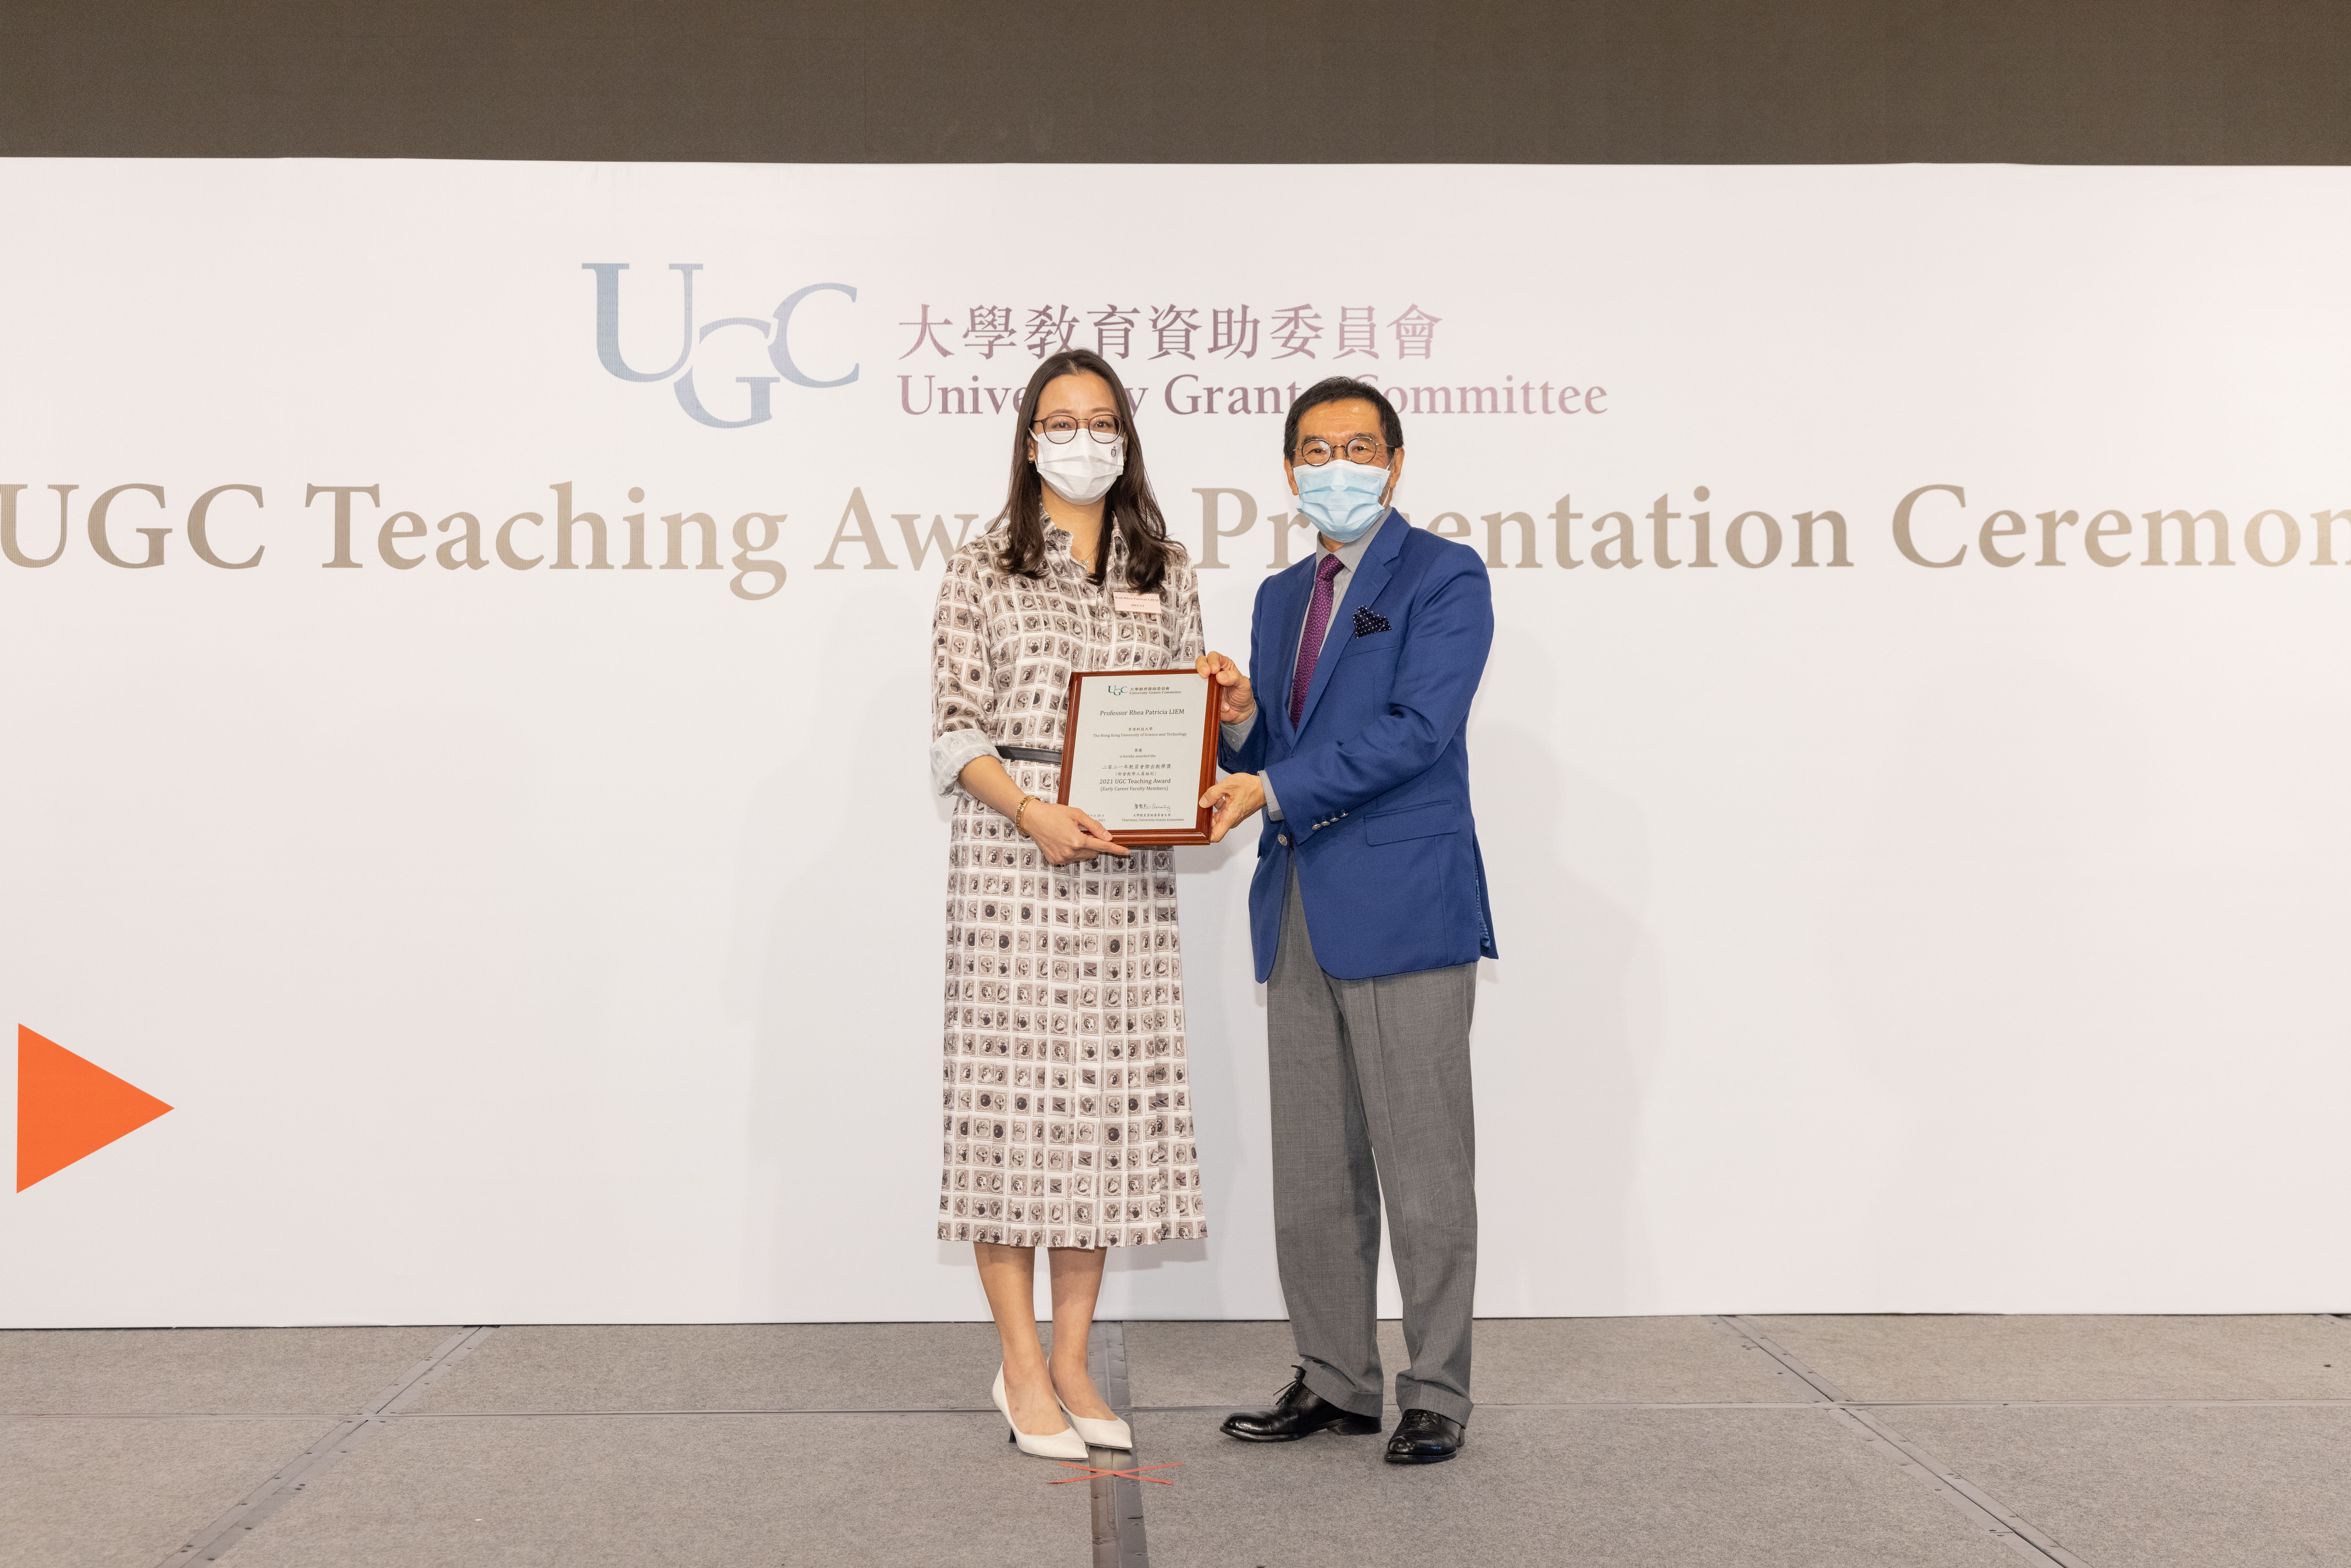 Chairman of the University Grants Committee (right) Mr. Carlson TONG (position) presents the 2021 UGC Teaching Award for Early Career Faculty Members to Prof. Rhea LIEM.